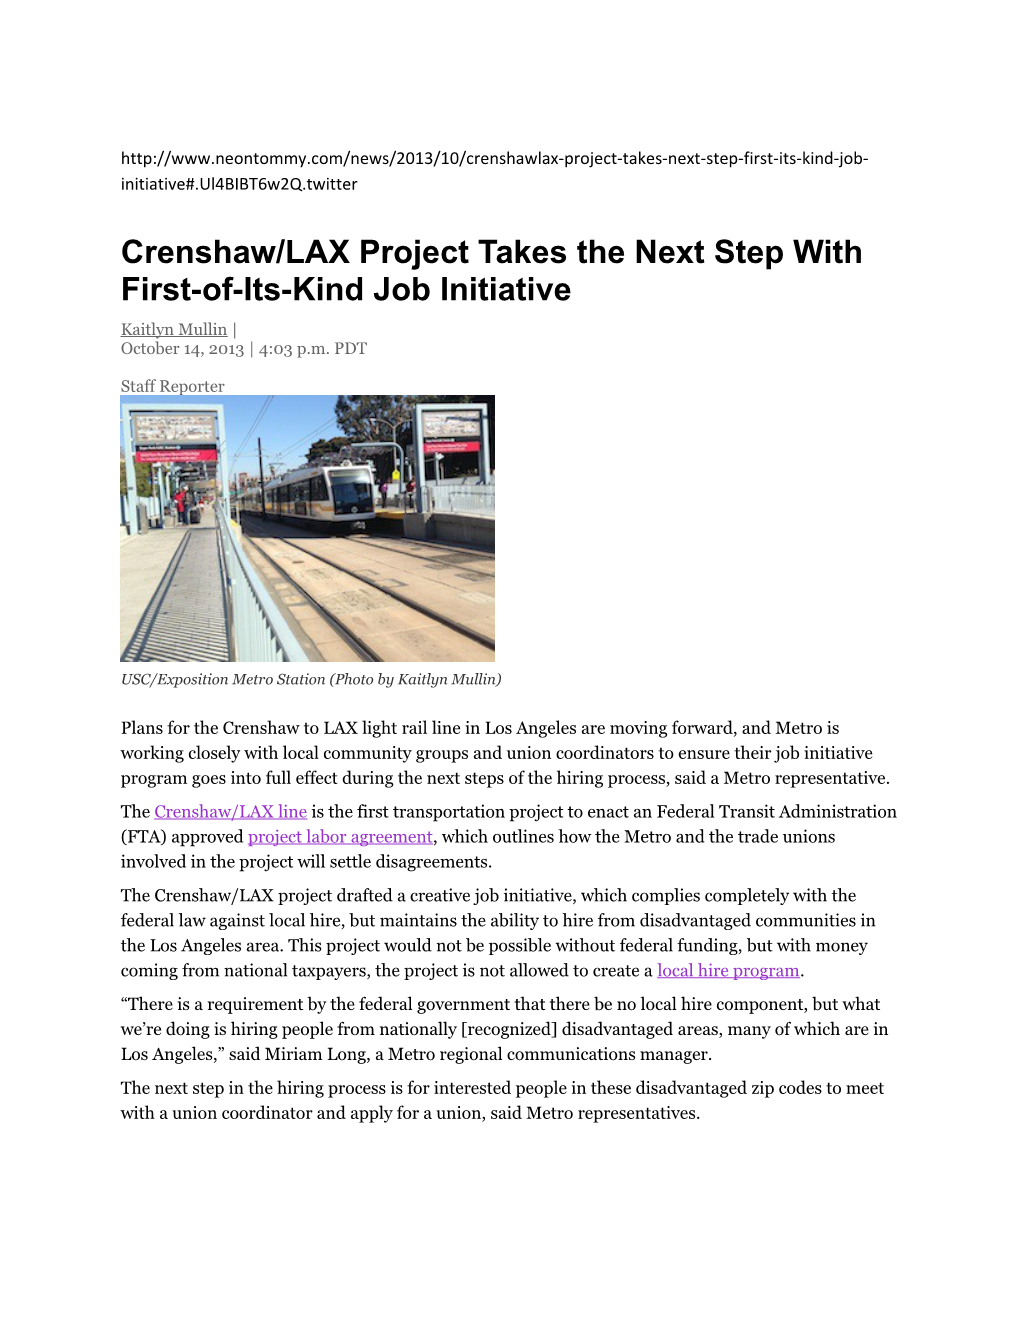 Crenshaw/LAX Project Takes the Next Step with First-Of-Its-Kind Job Initiative